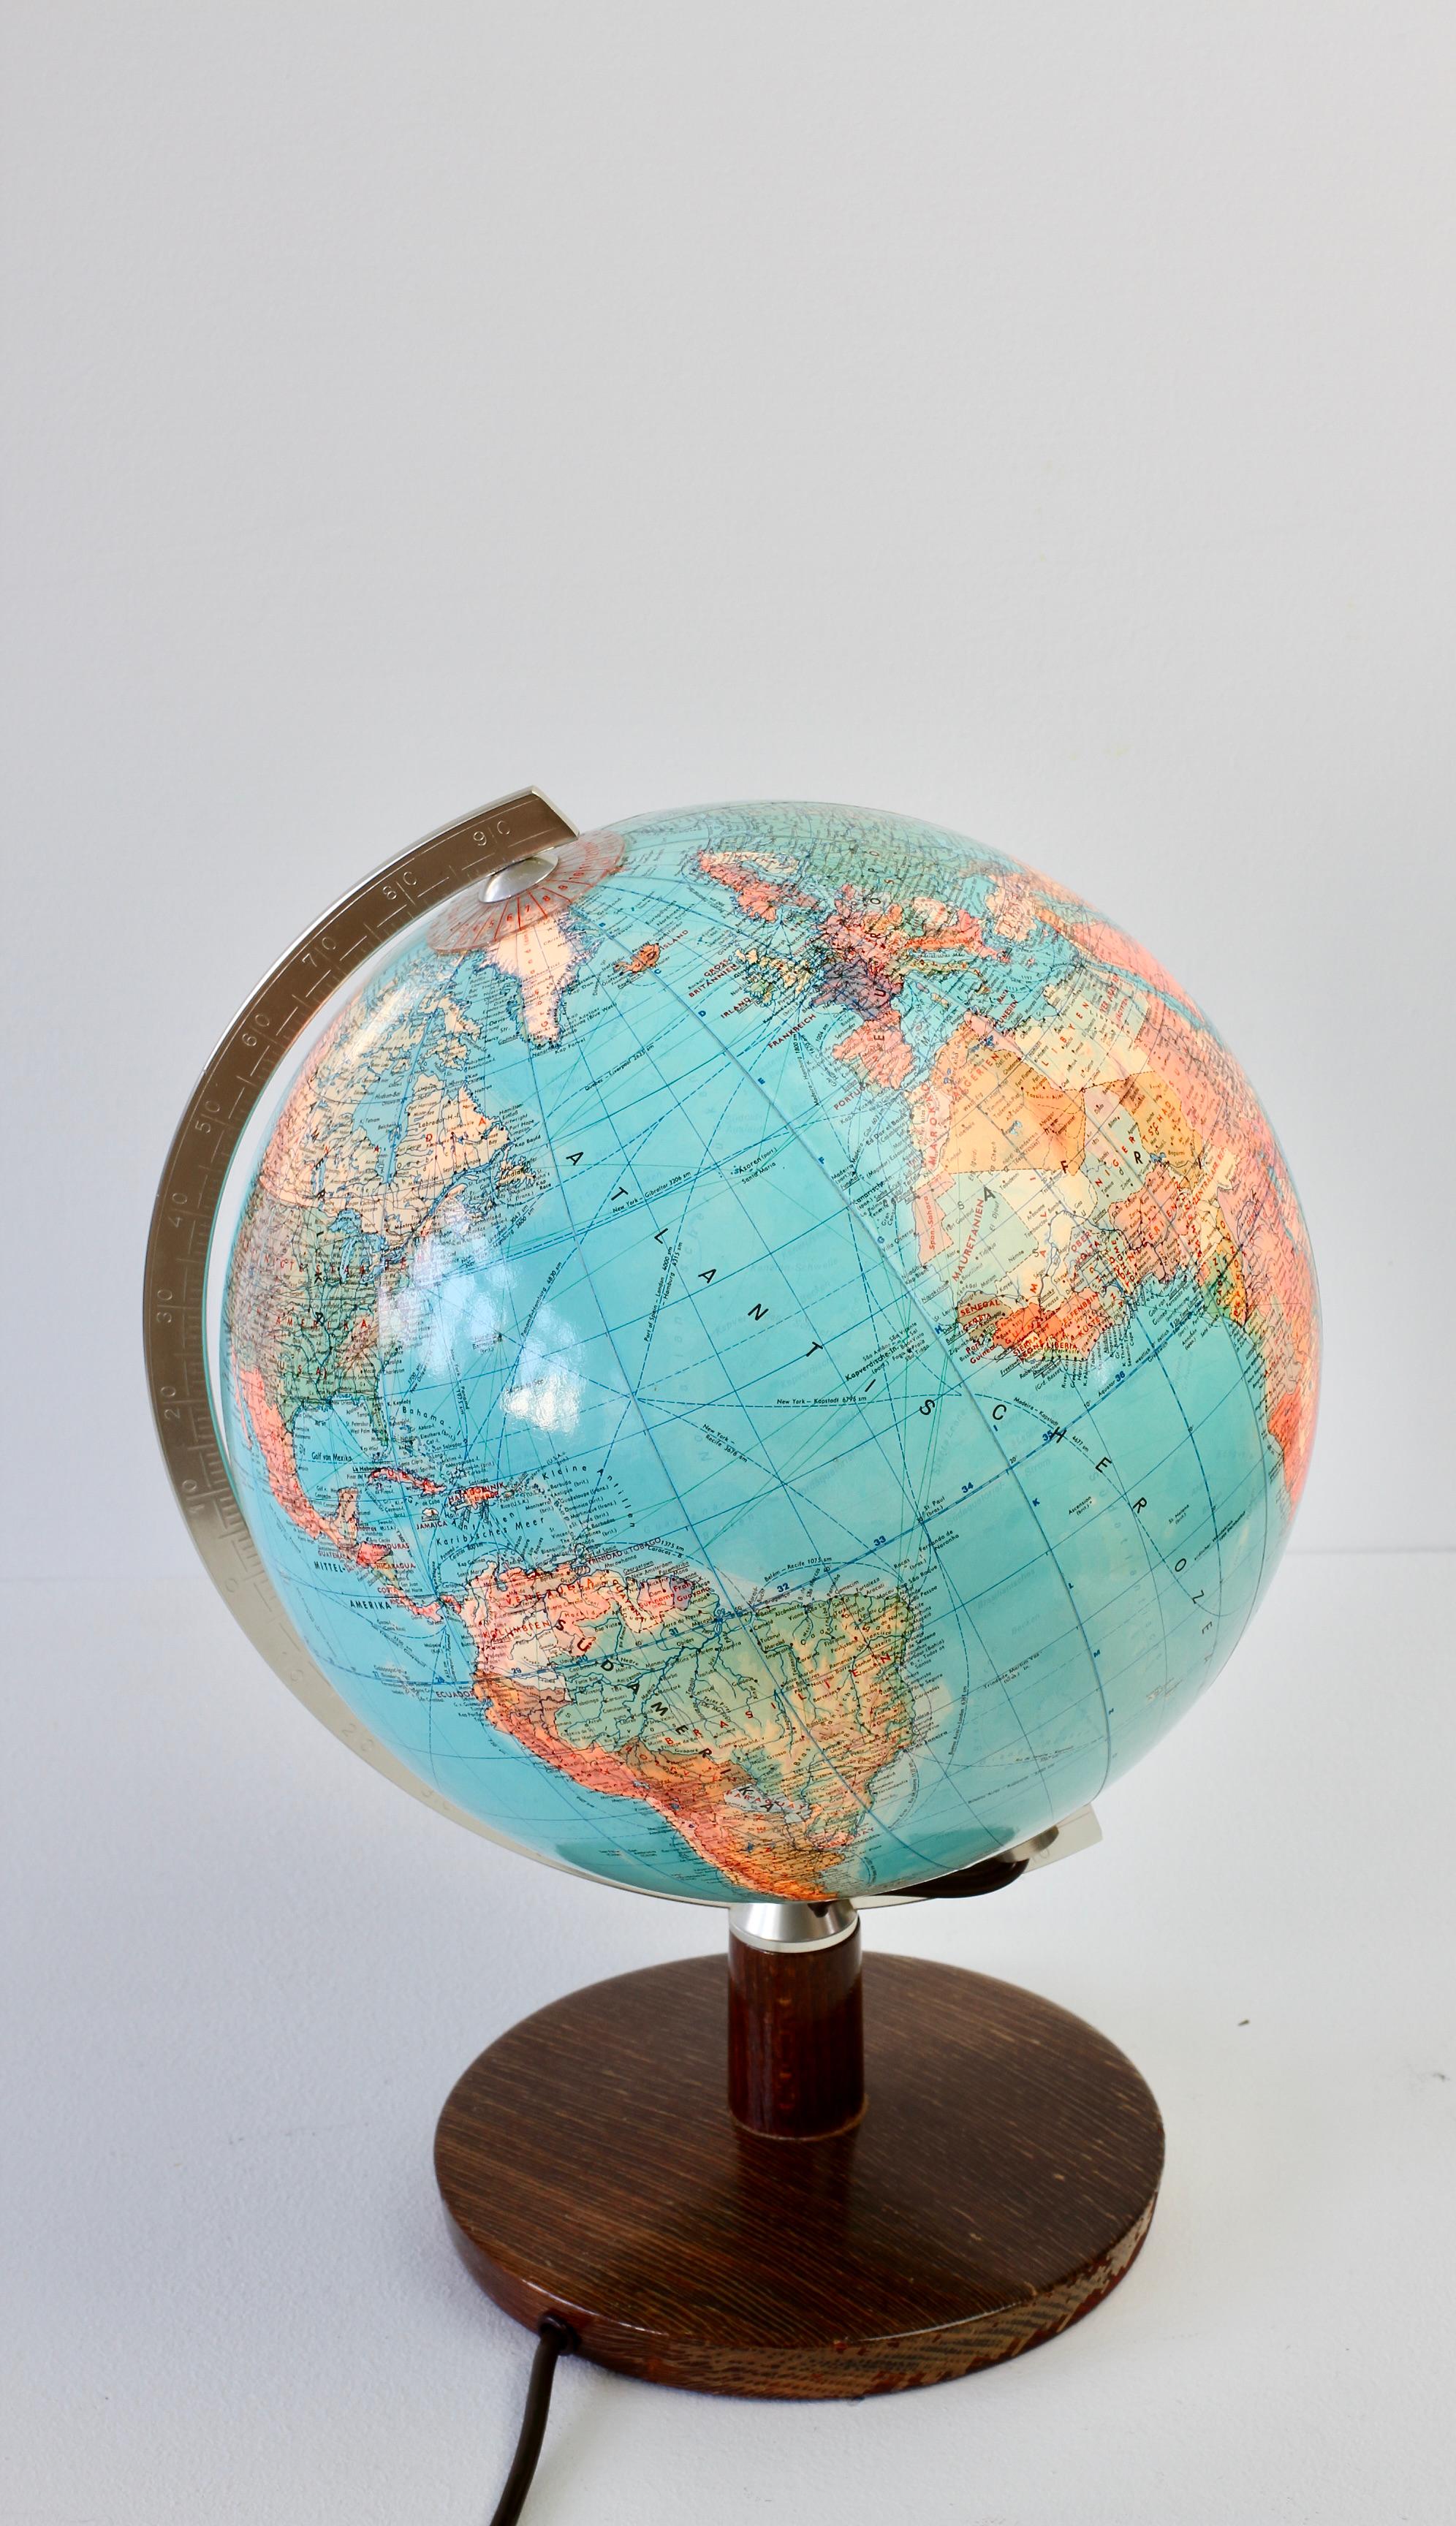 Stained Vintage Mid-Century World Map Globe Lamp Light by JRO Verlag Munich circa 1970s For Sale